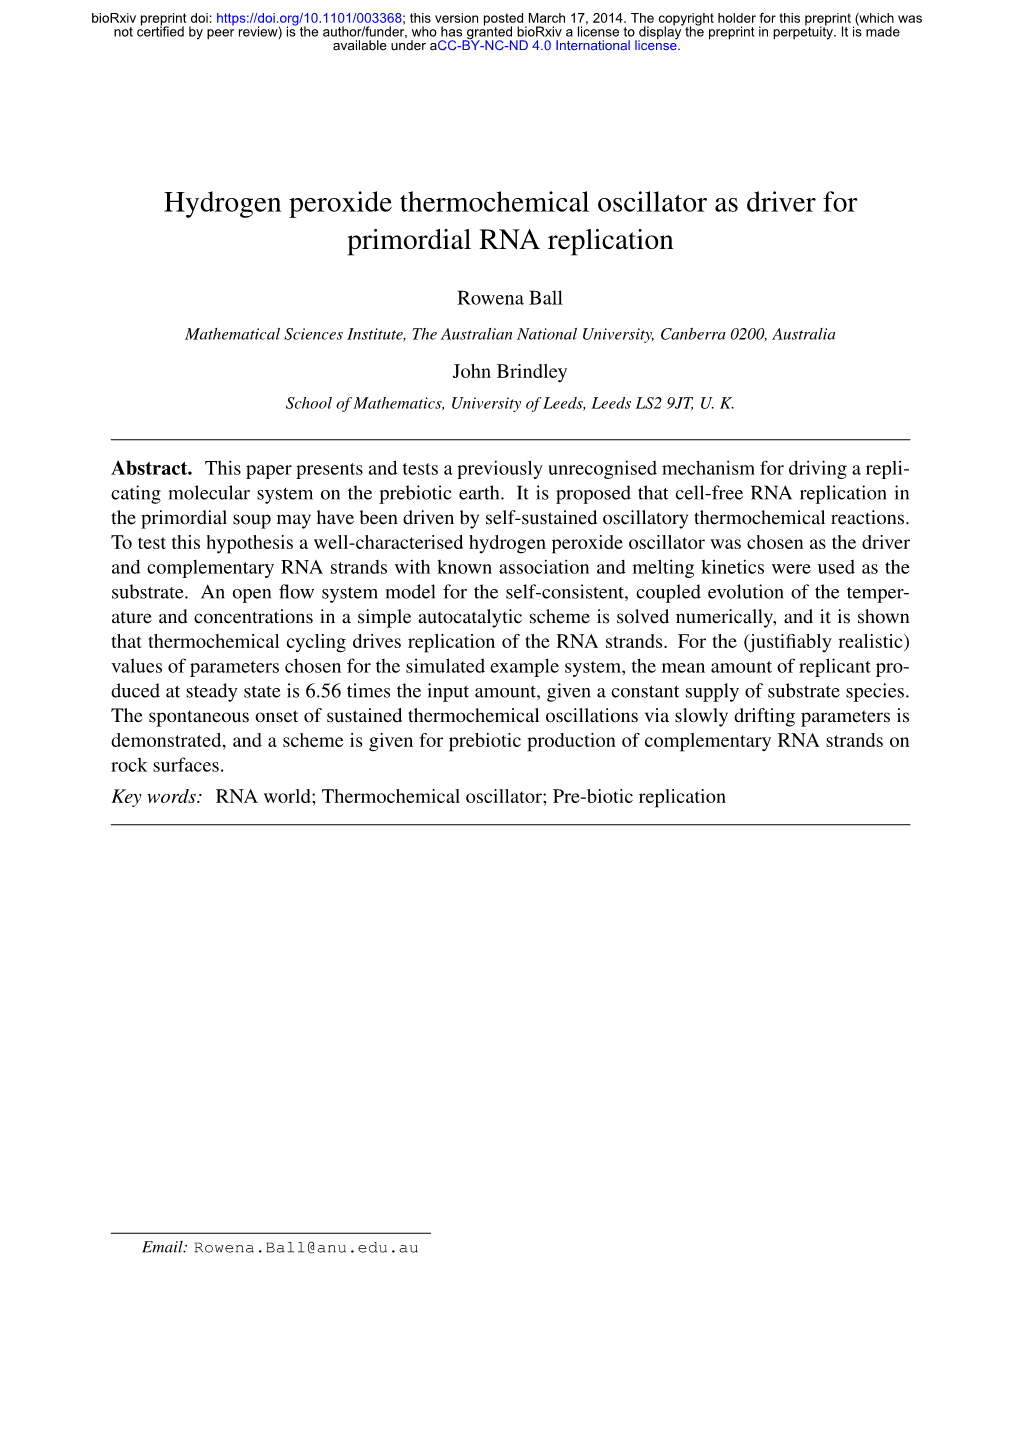 Hydrogen Peroxide Thermochemical Oscillator As Driver for Primordial RNA Replication